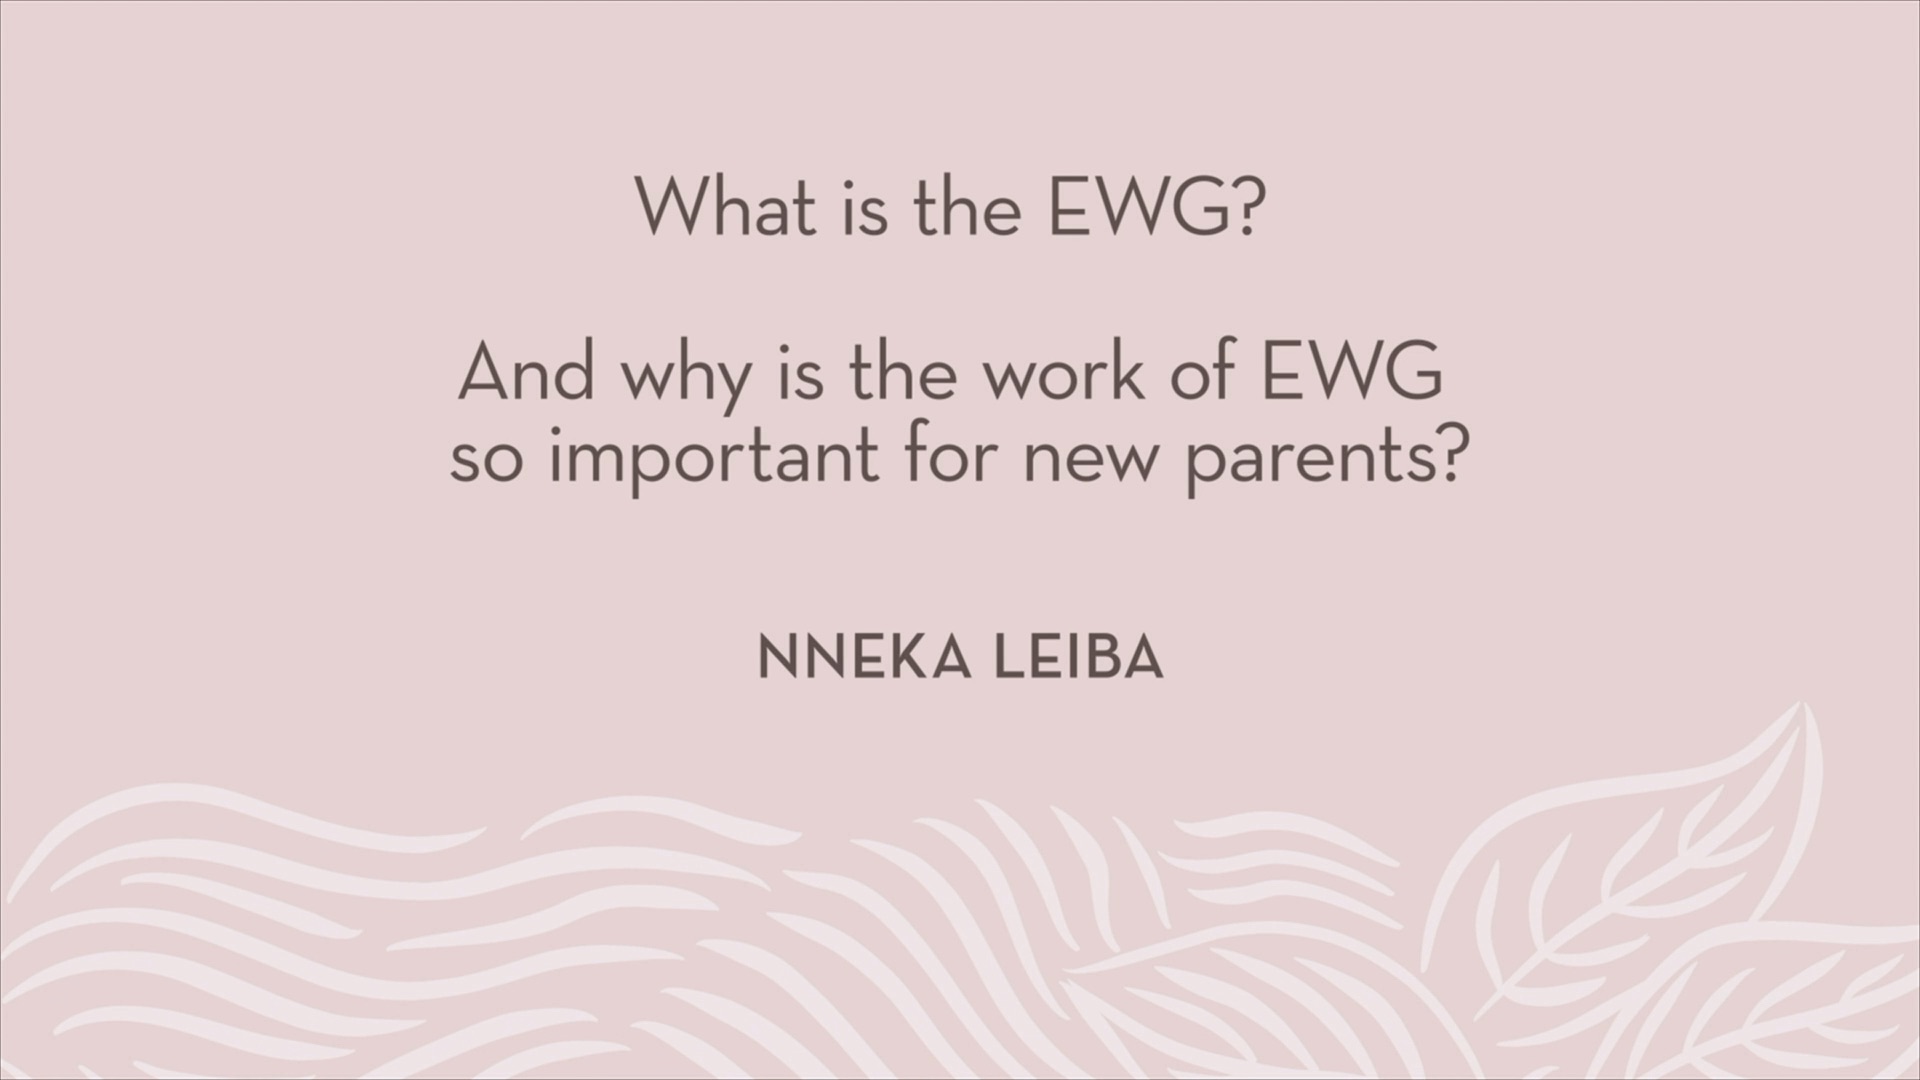 Nneka Leiba | What is the EWG? And why is the work of EWG so important for new parents?